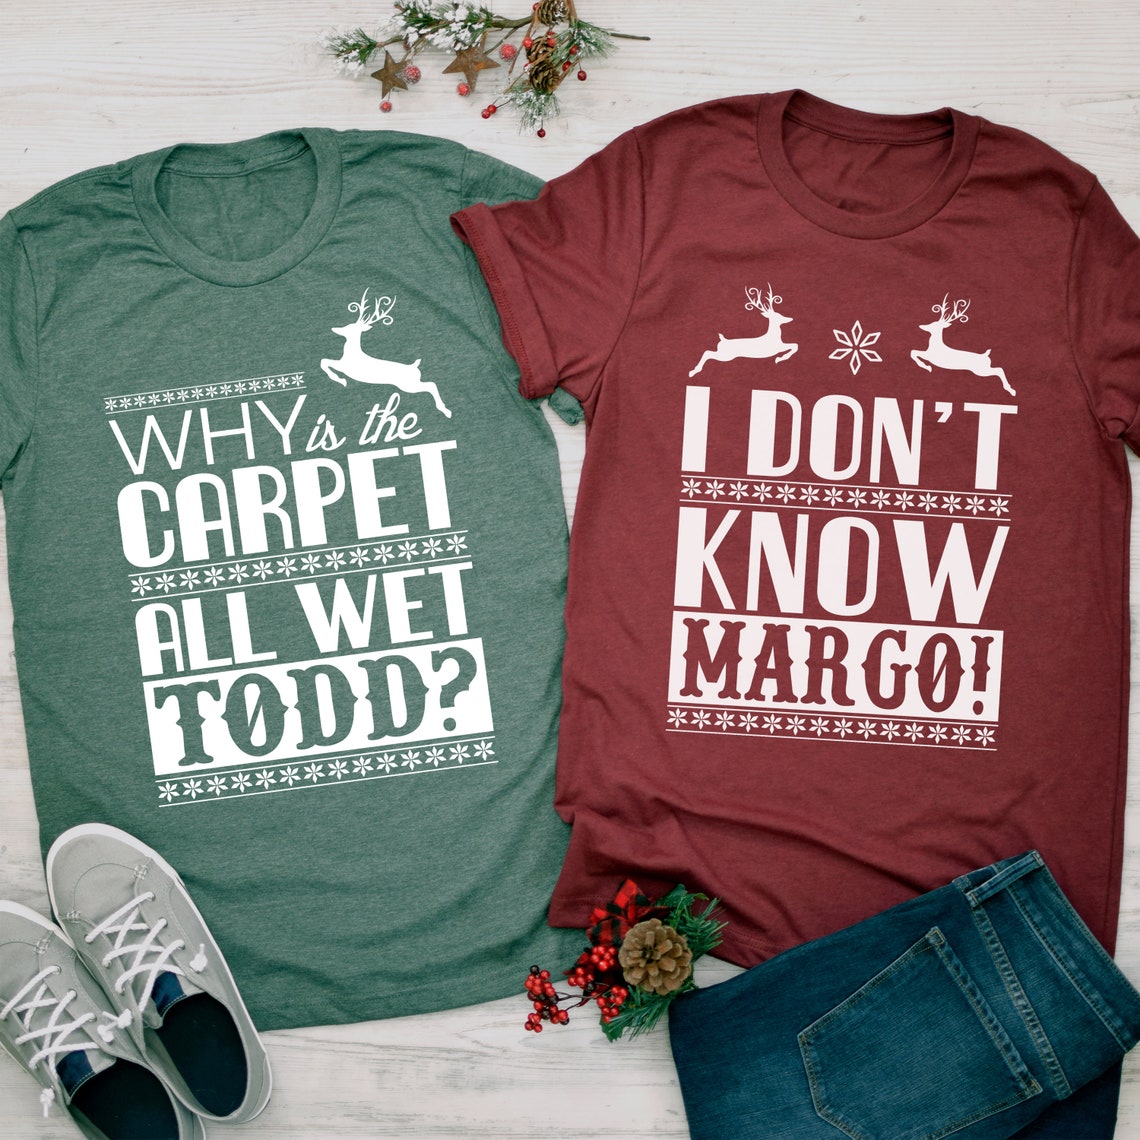 Christmas Vacation Todd And Margo Shirt  Couple Christmas Shirts  Christmas Shirts  Ugly Christmas Shirt  Funny Christmas Couples Shirt